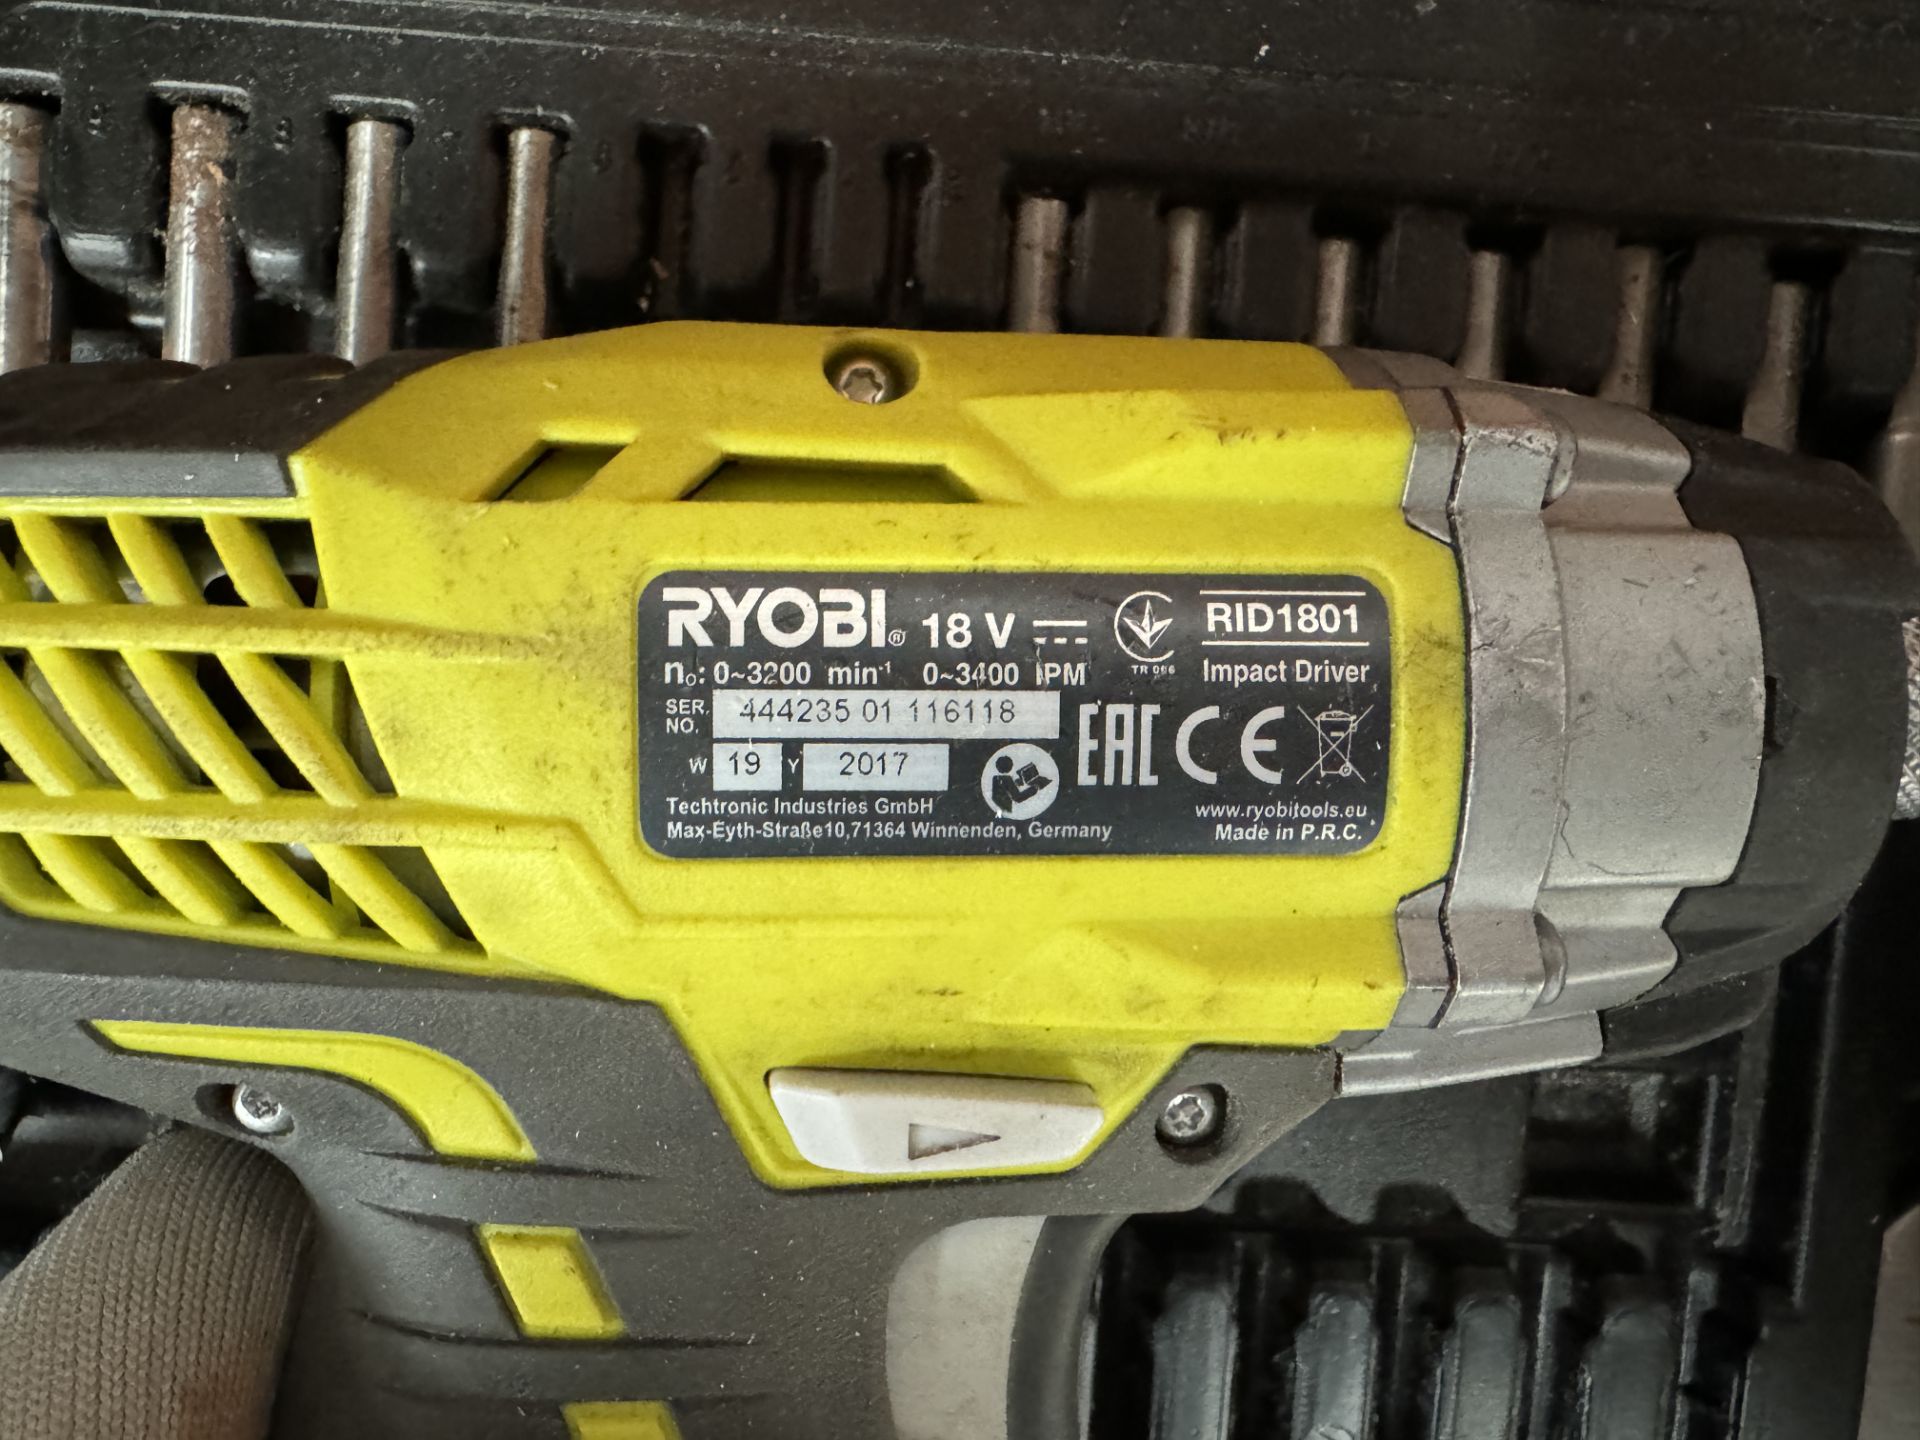 AEG BSB 18G Cordless Drill with Two Batteries &Charger and a Ryobi RID1801 Impact Driver with - Image 6 of 6